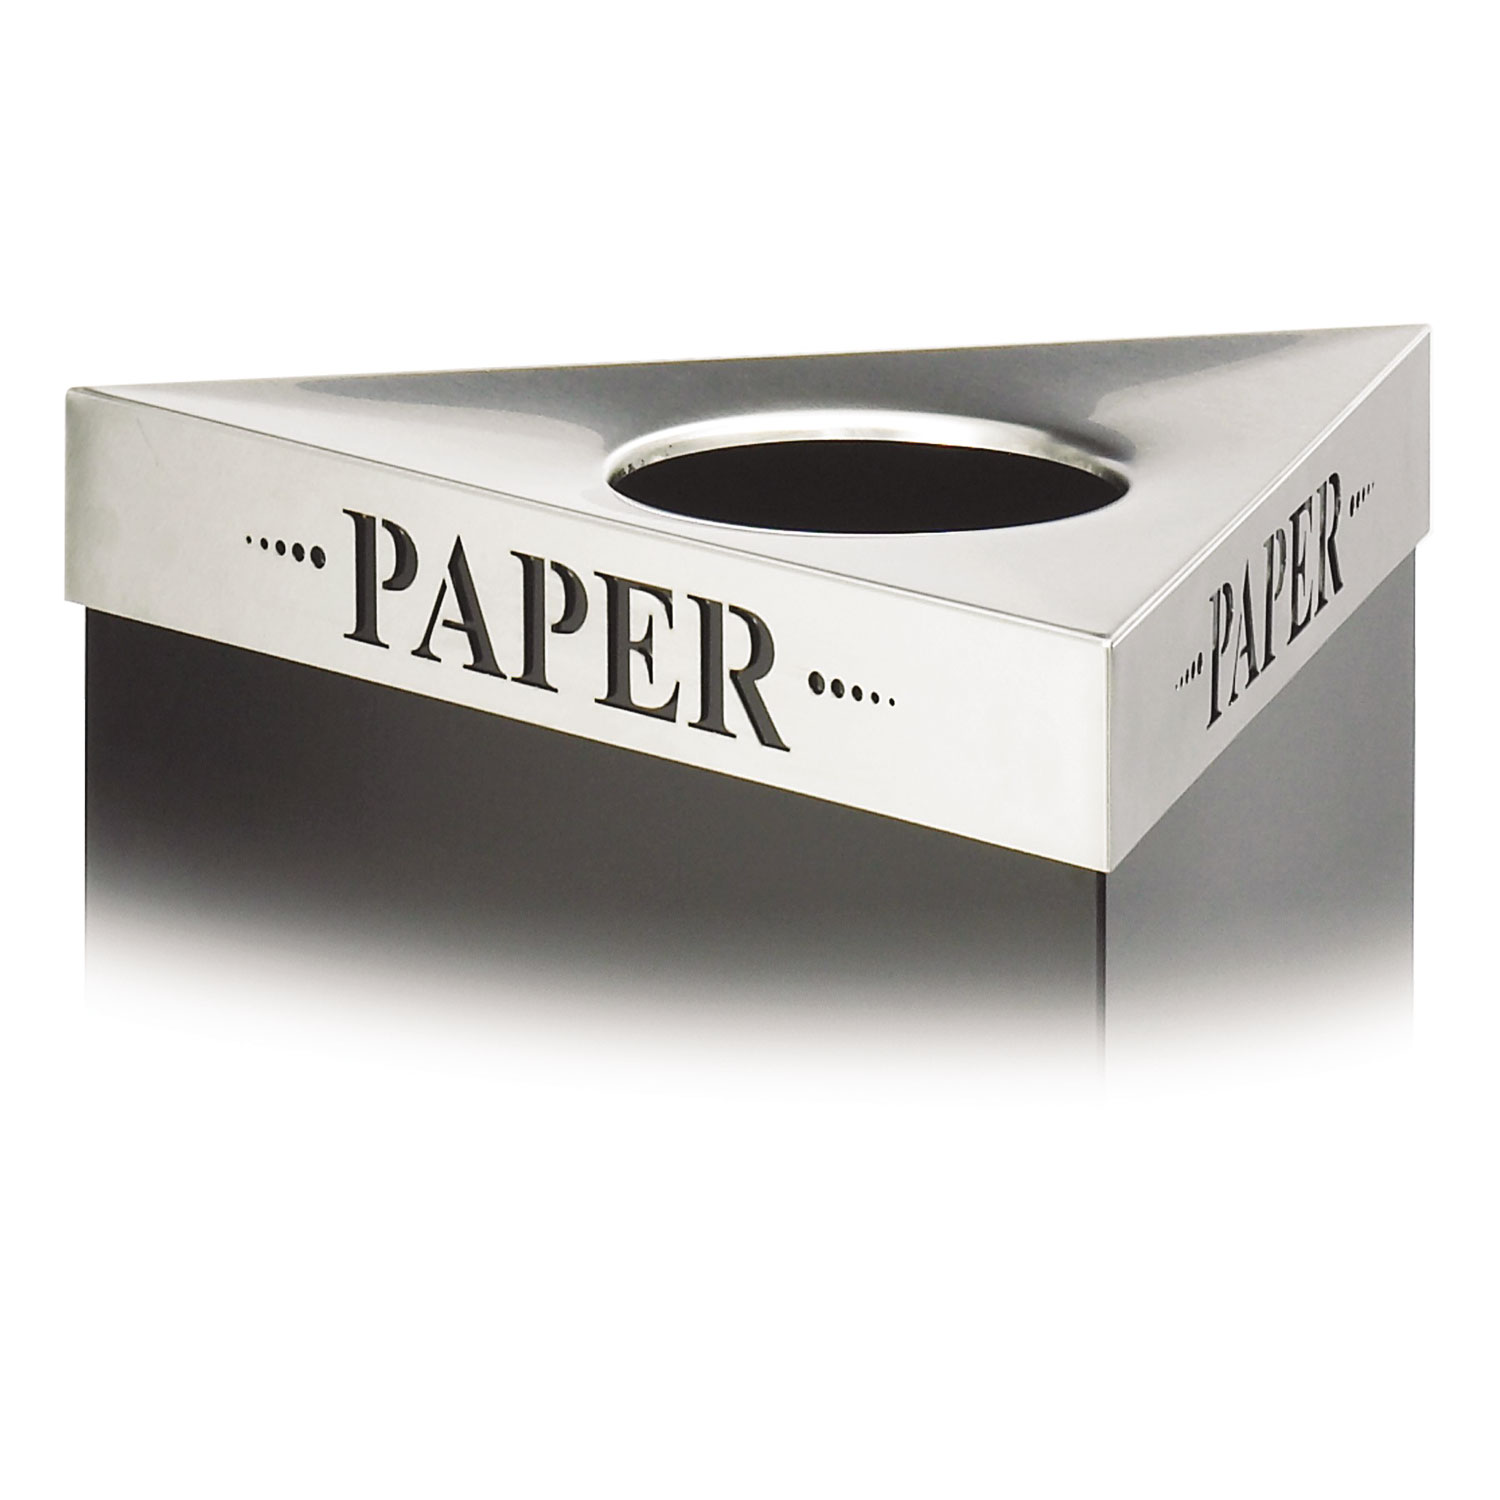 Trifecta Waste Receptacle Lid, Laser Cut PAPER Inscription, Stainless Steel